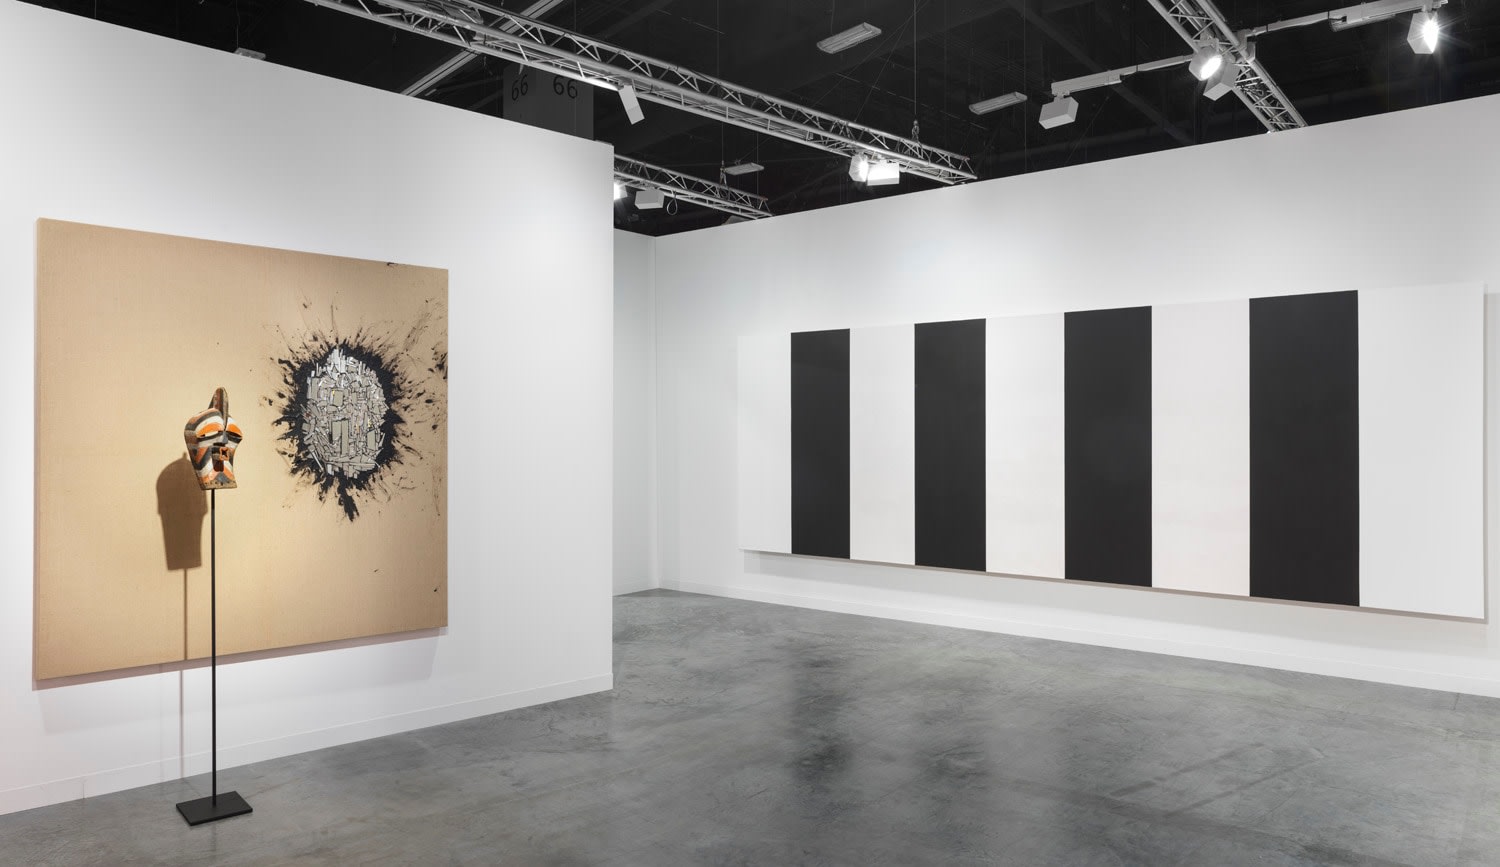 Installation view of Lehmann Maupin's booth at Art Basel Miami Beach 2018, view 6